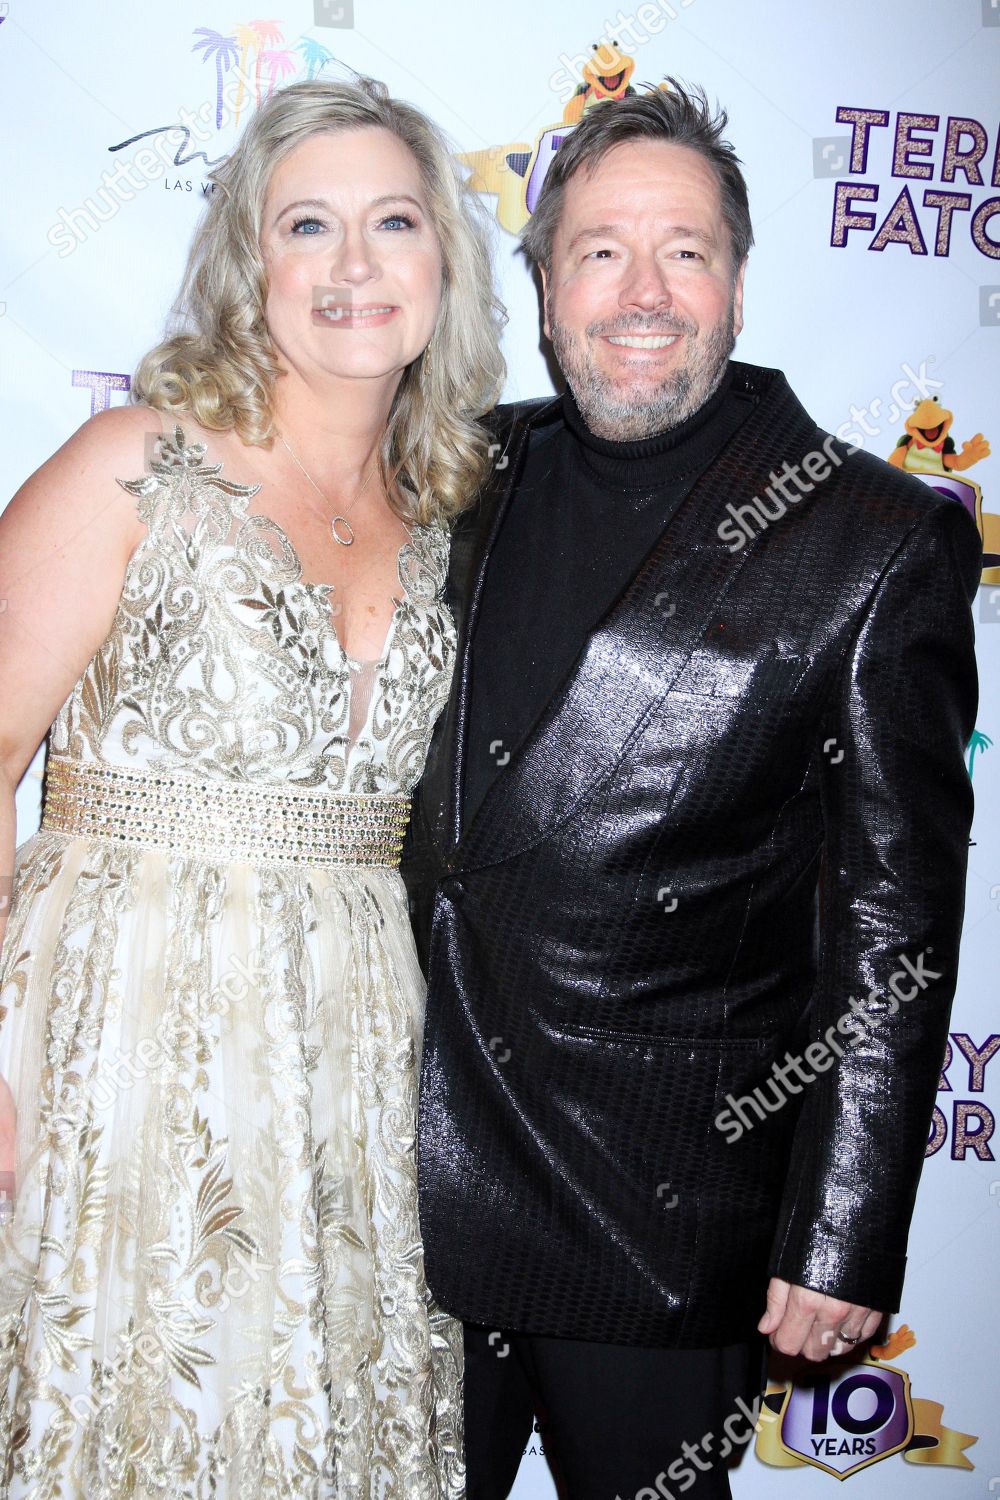 Terry Fator Angie Fiore Fator Editorial Stock Photo Stock Image